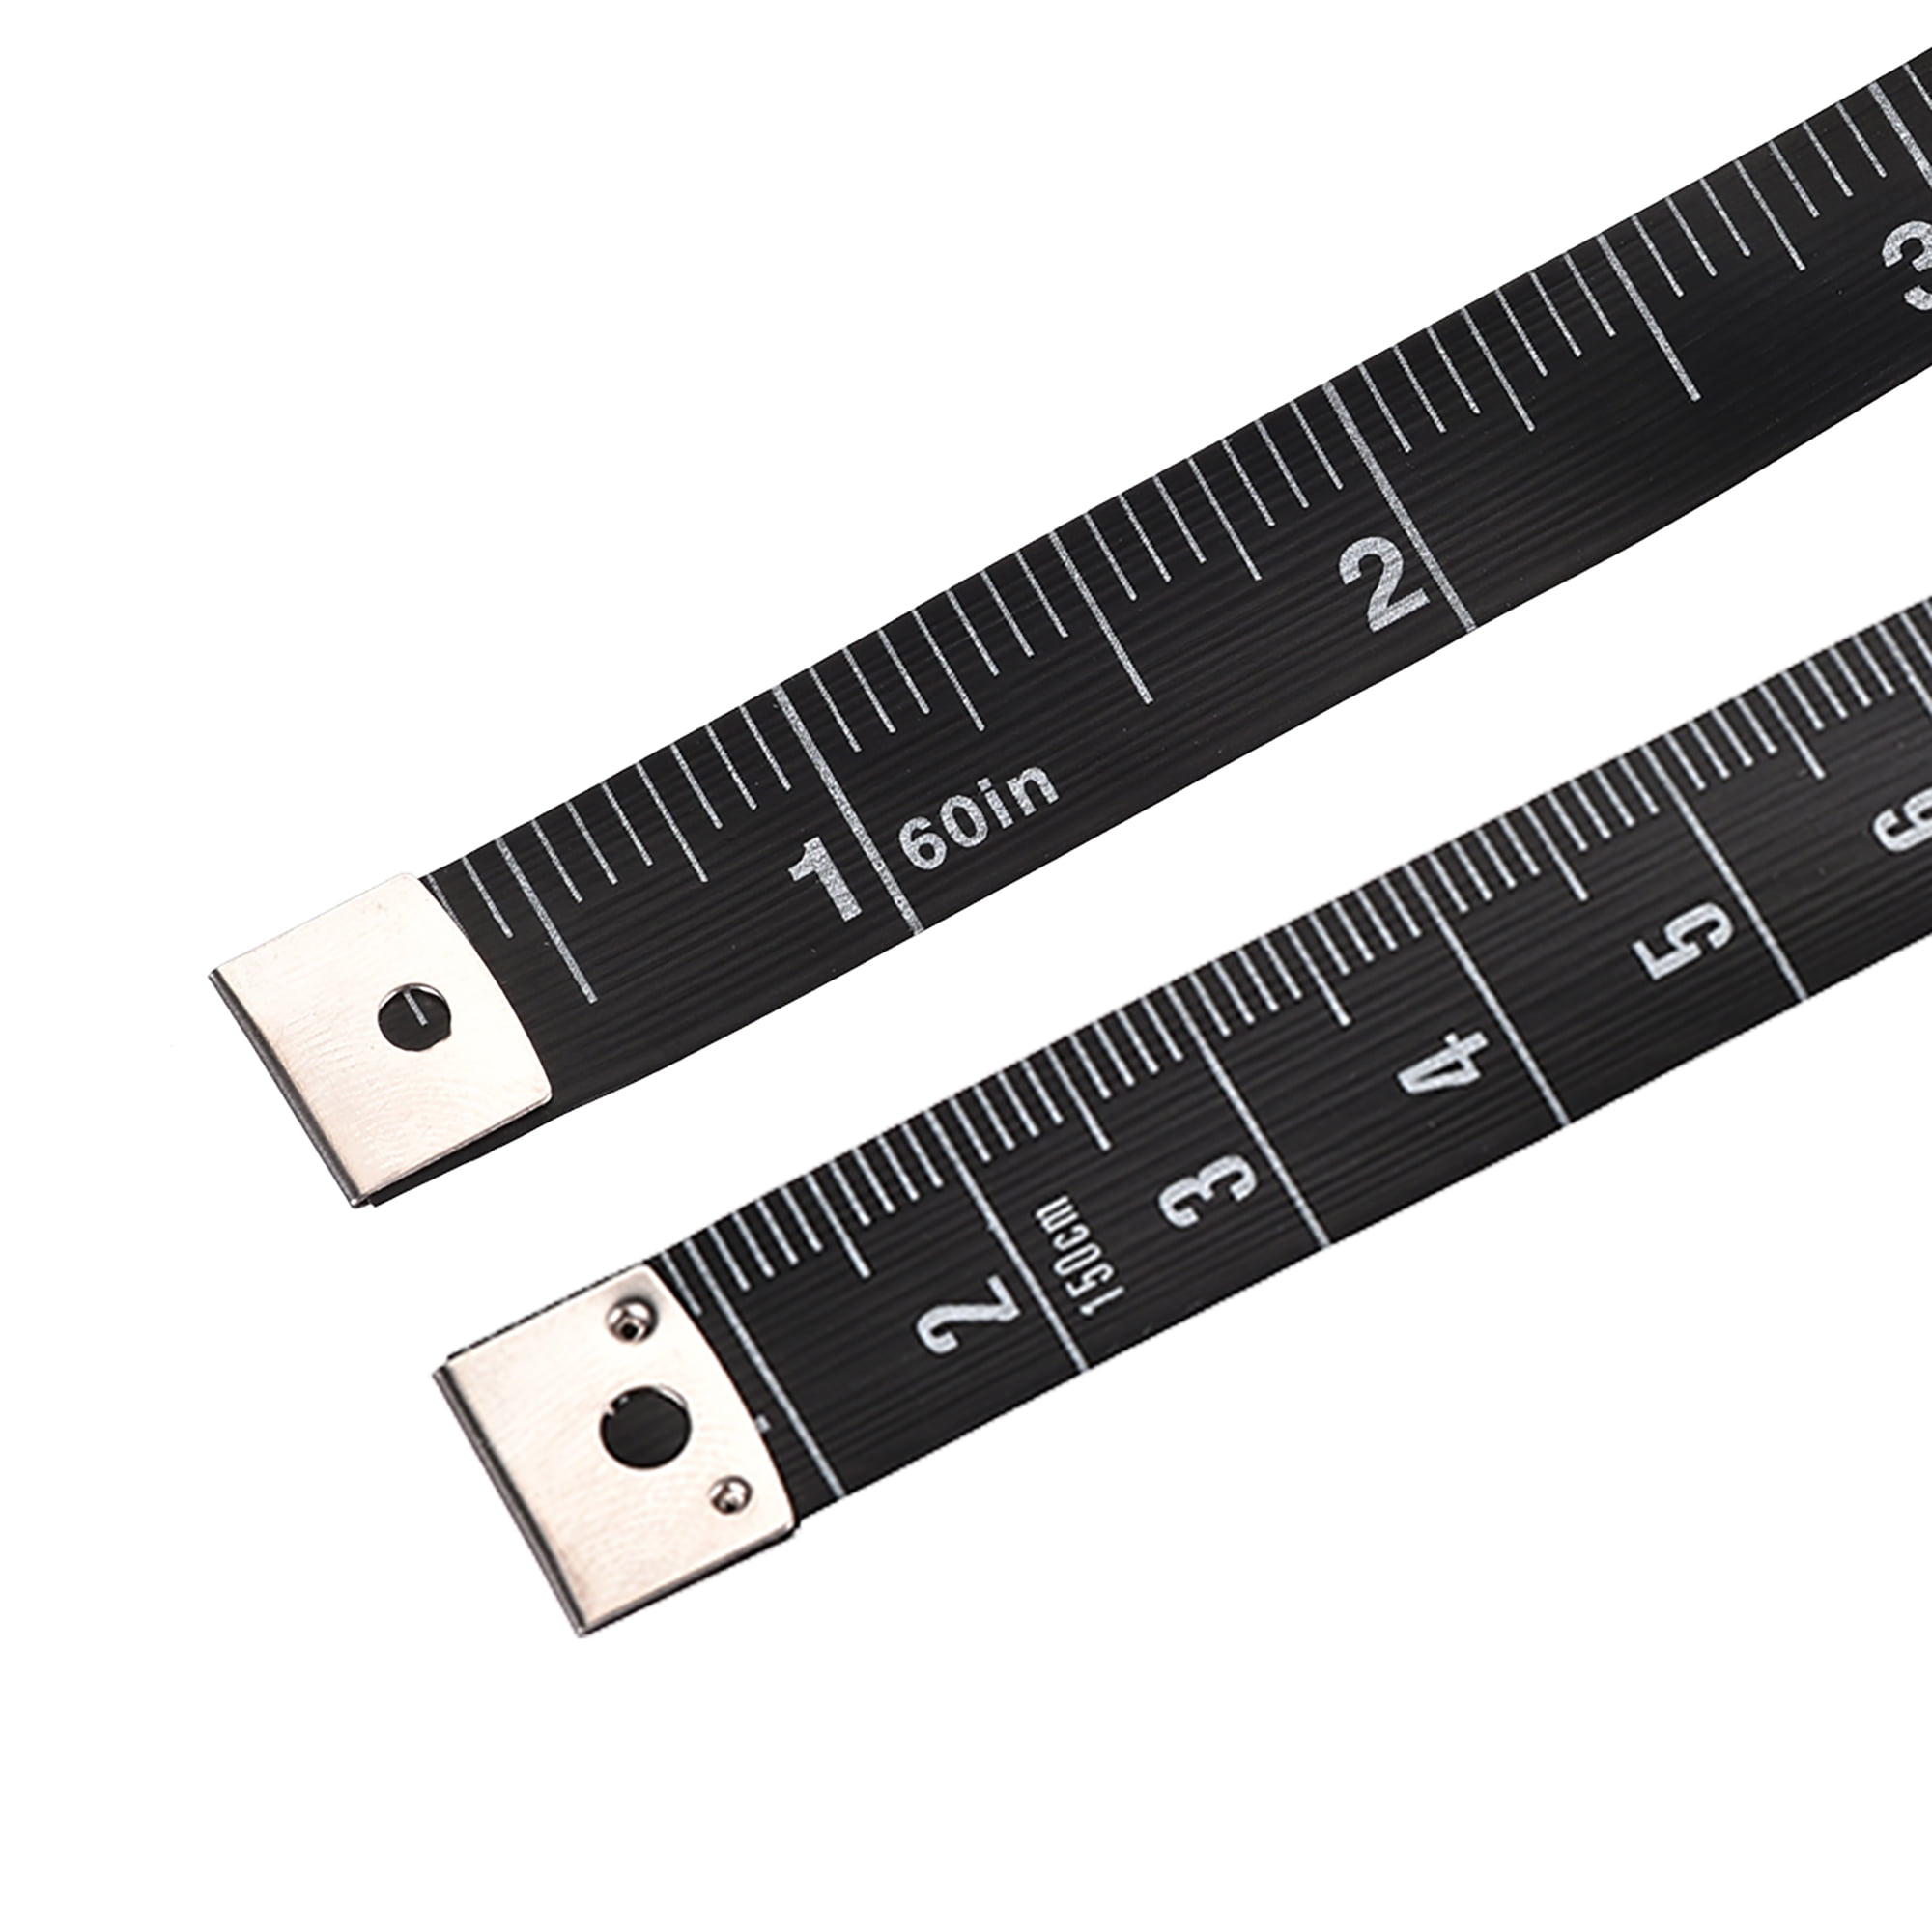 PRECISE 60 (150 cm) Cloth Tape Measure | Dual-Sided | Flexible & Durable |  SAE & Metric Units | Ideal for Fabric & Curved Objects